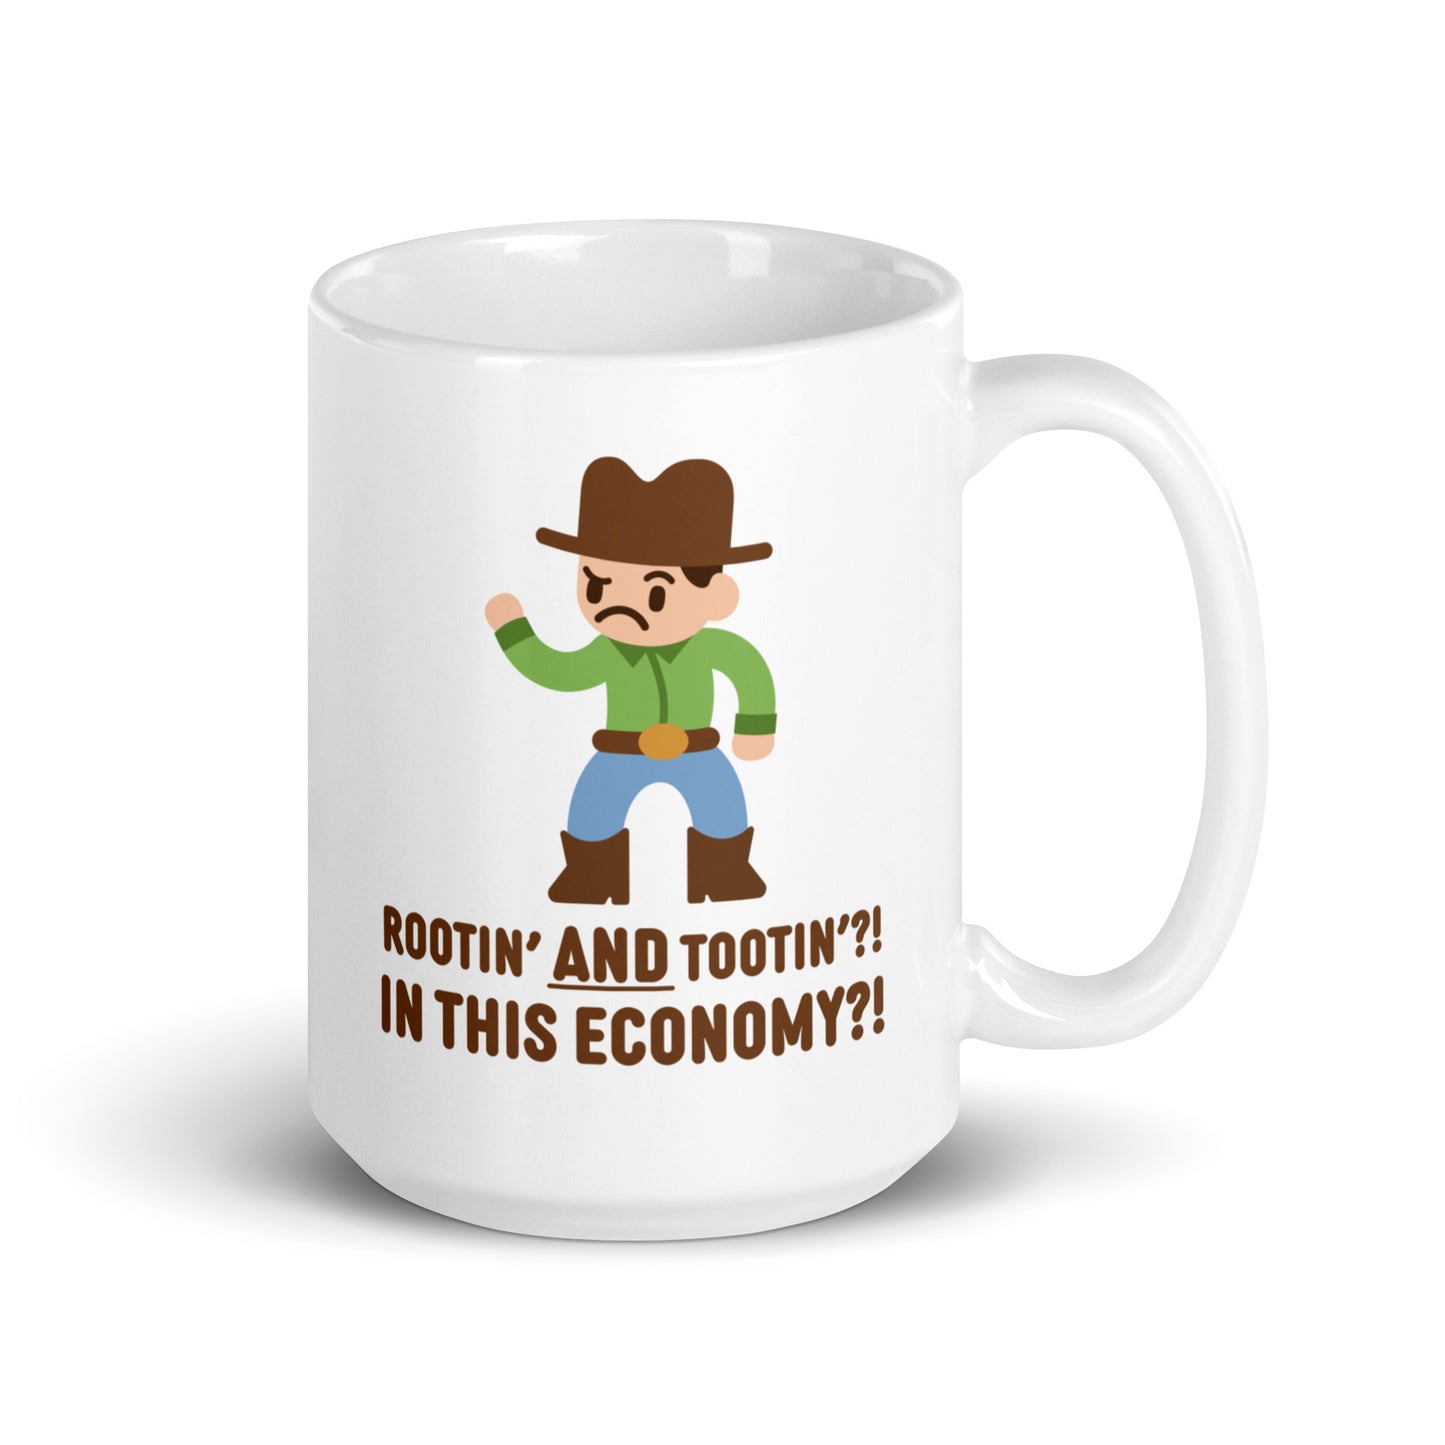 A white 15 ounce ceramic coffee mug featuring an illustration of a confused-looking cowboy wearing a green shirt. Text underneath the cowboy reads "Rootin' AND tootin'?! In this economy?!"